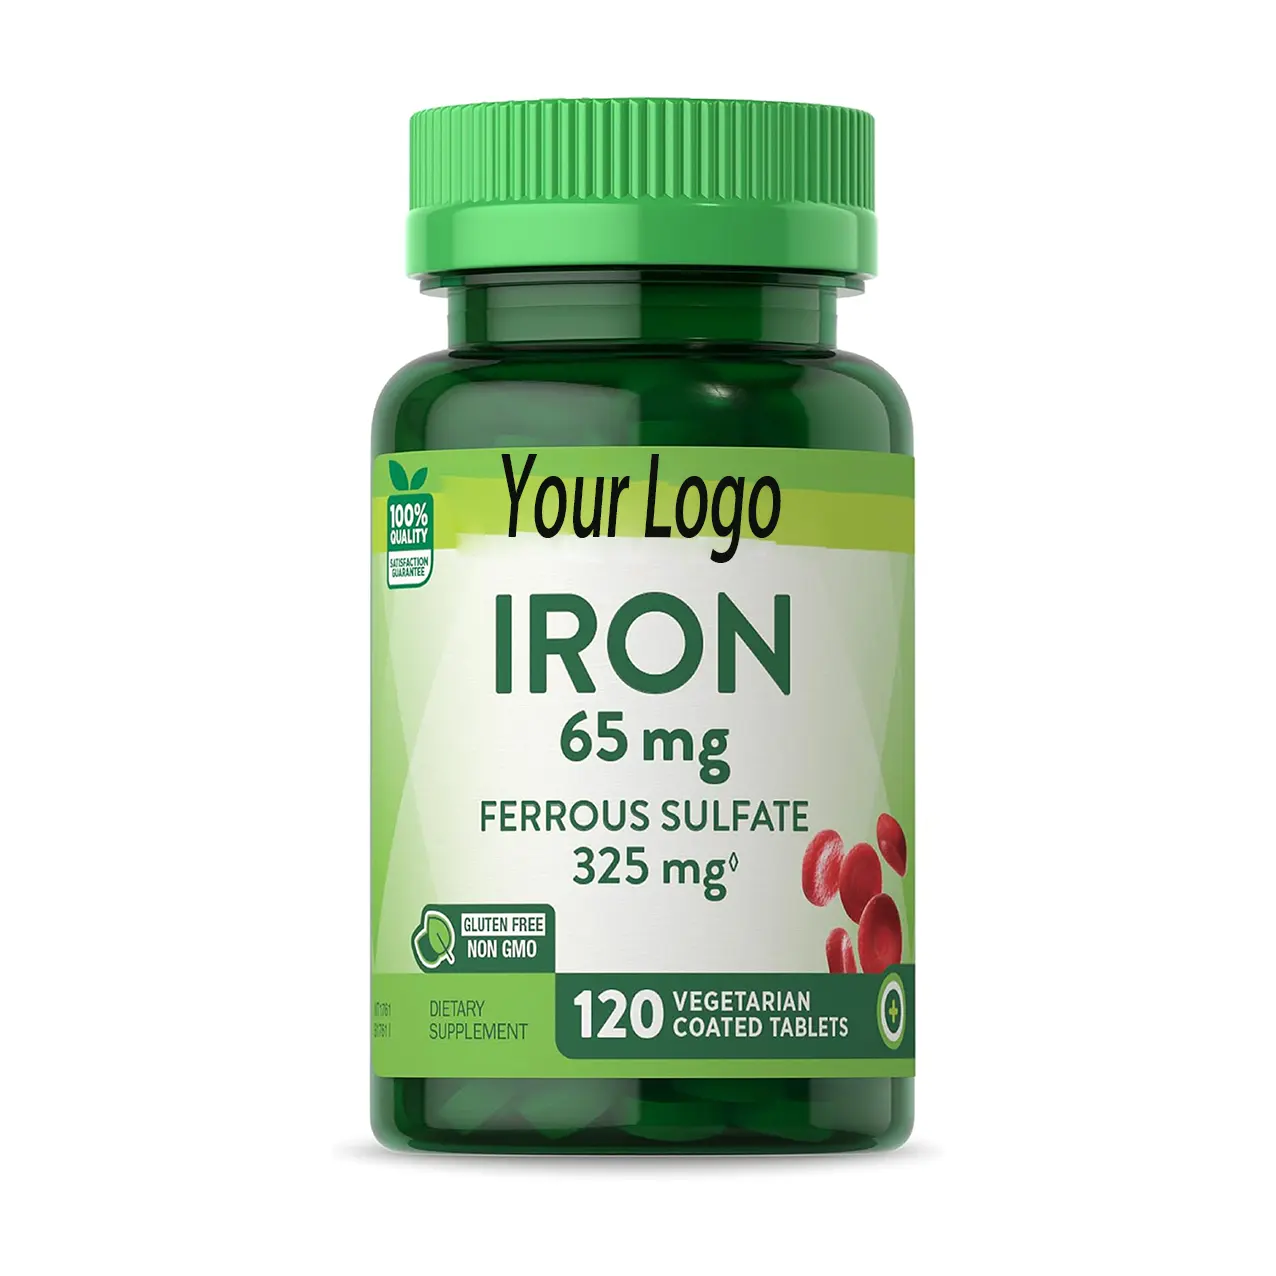 Ferrous Sulfate Iron Supplement Skin Nourishing Ruddy and Healthy Iron Tablets